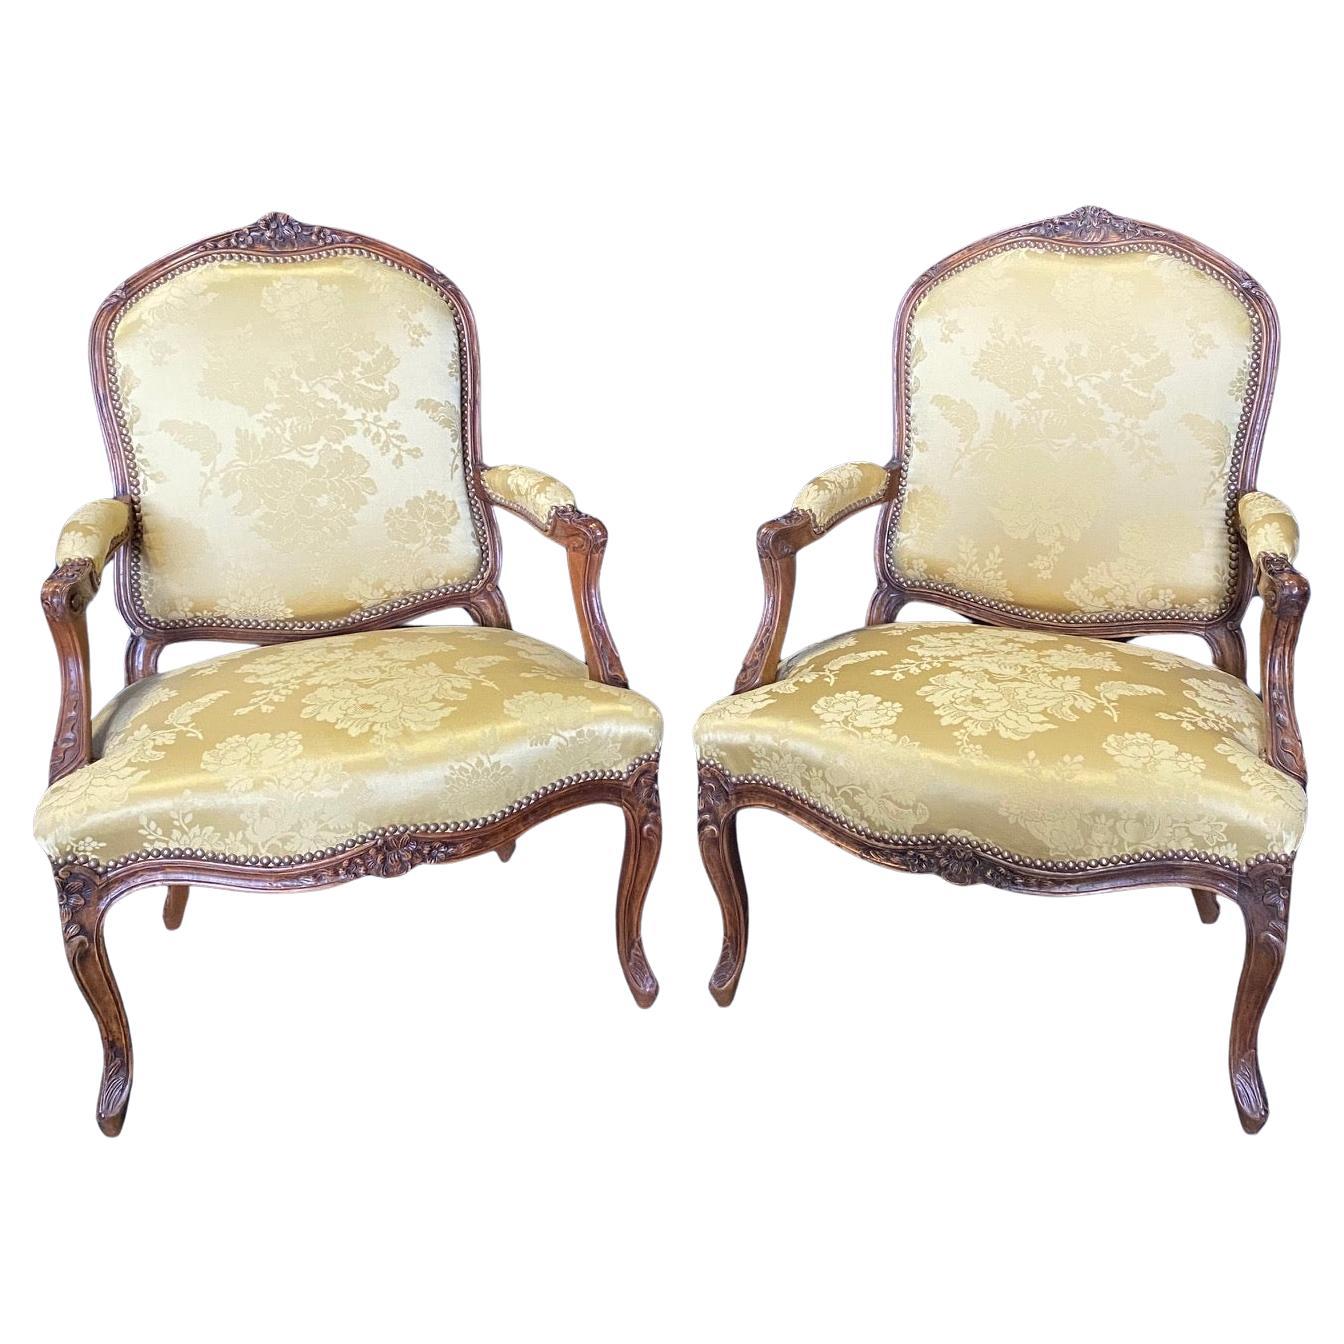 Pair of French Louis XV Walnut Carved Fauteuils or Arm Chairs  For Sale